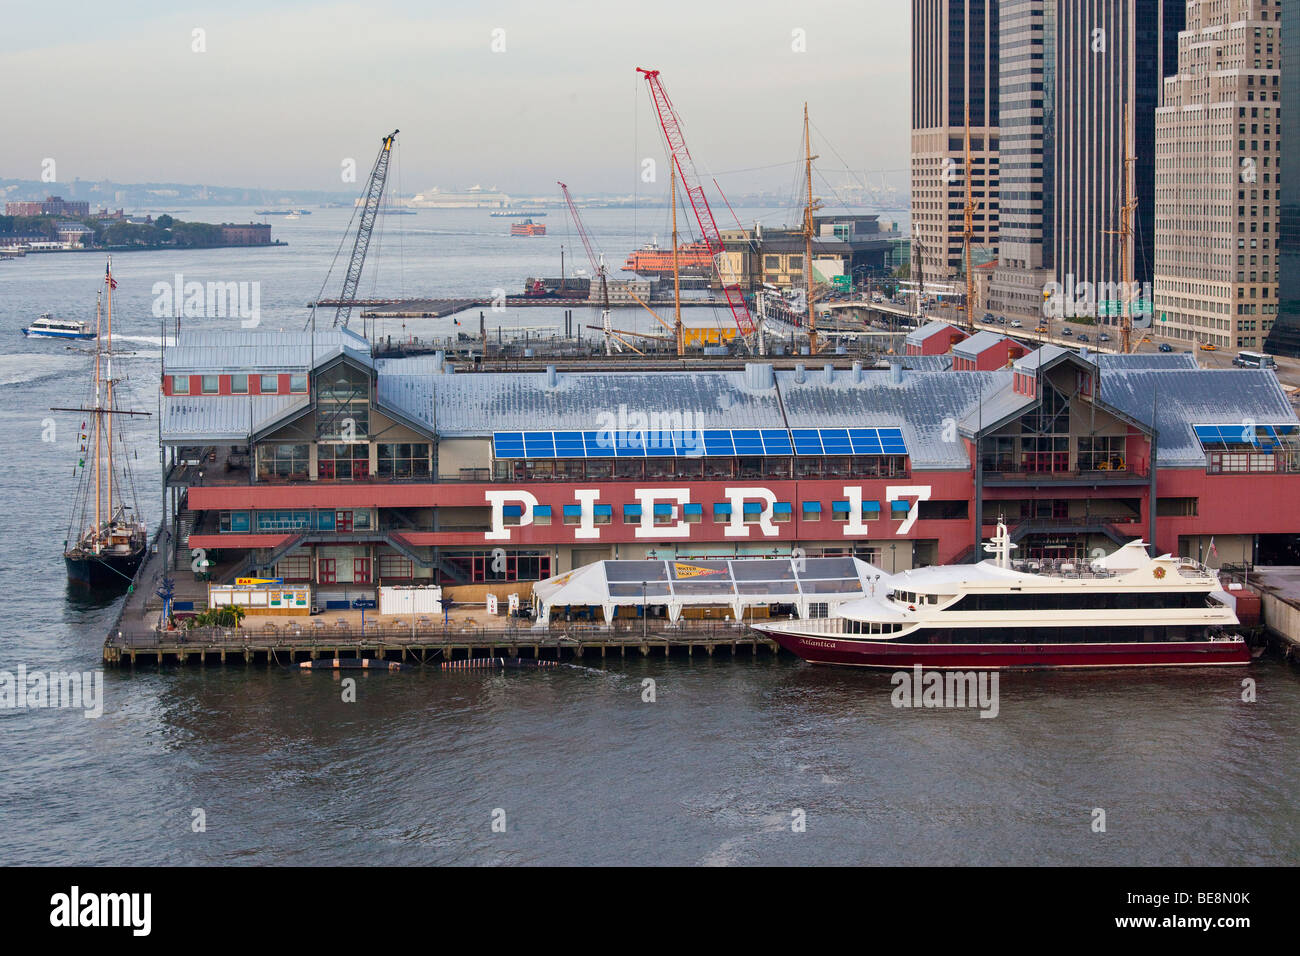 Pier 17 at South Street Seaport in New York City Stock Photo